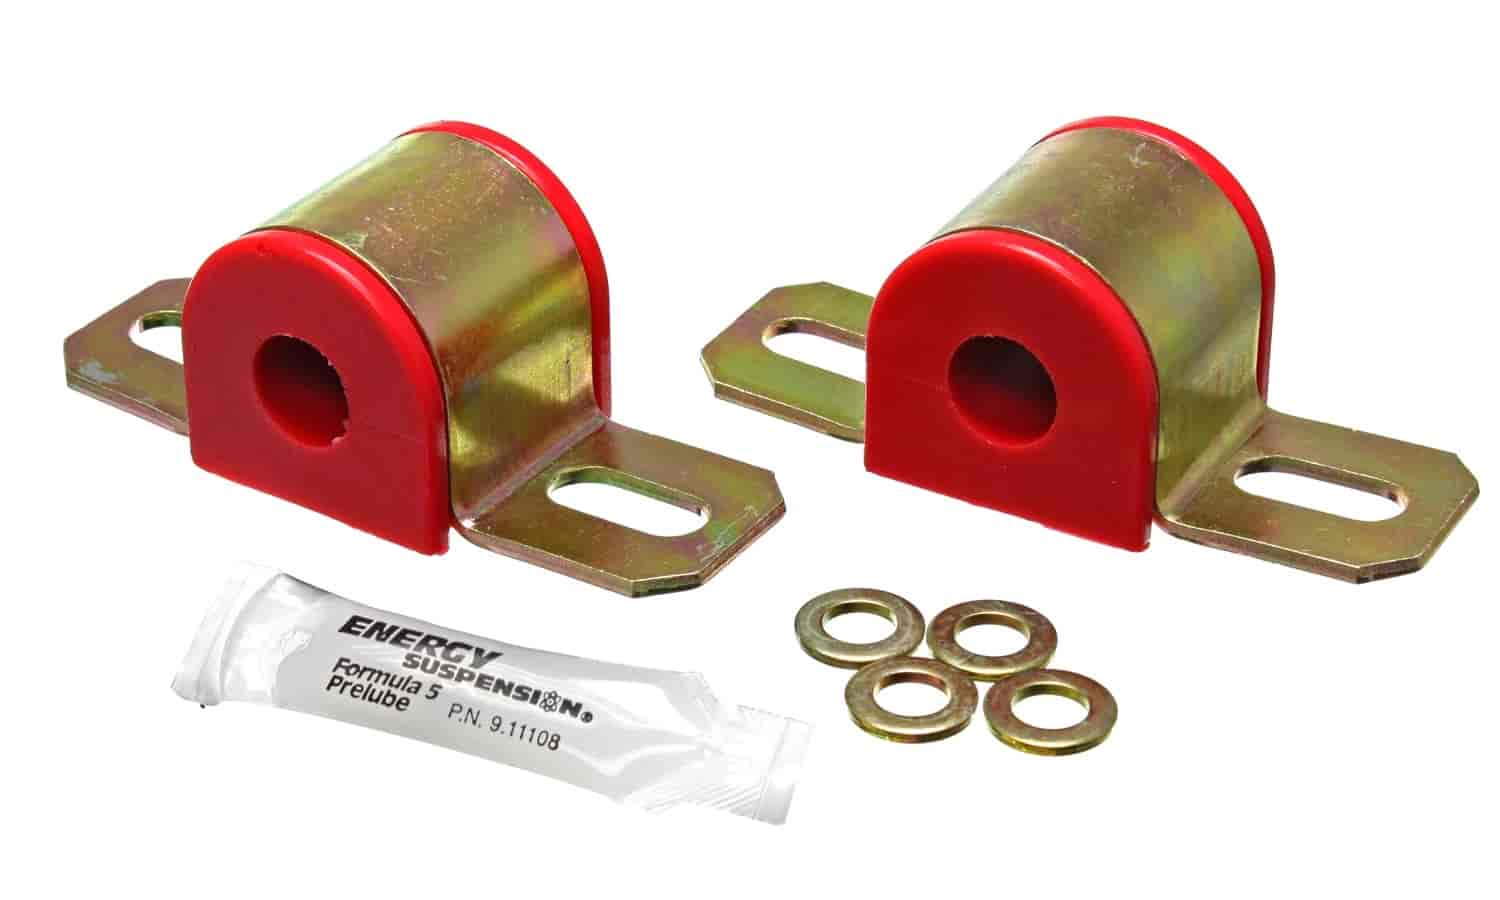 Universal Non-Greaseable Sway Bar Bushings 7/8" or 22mm